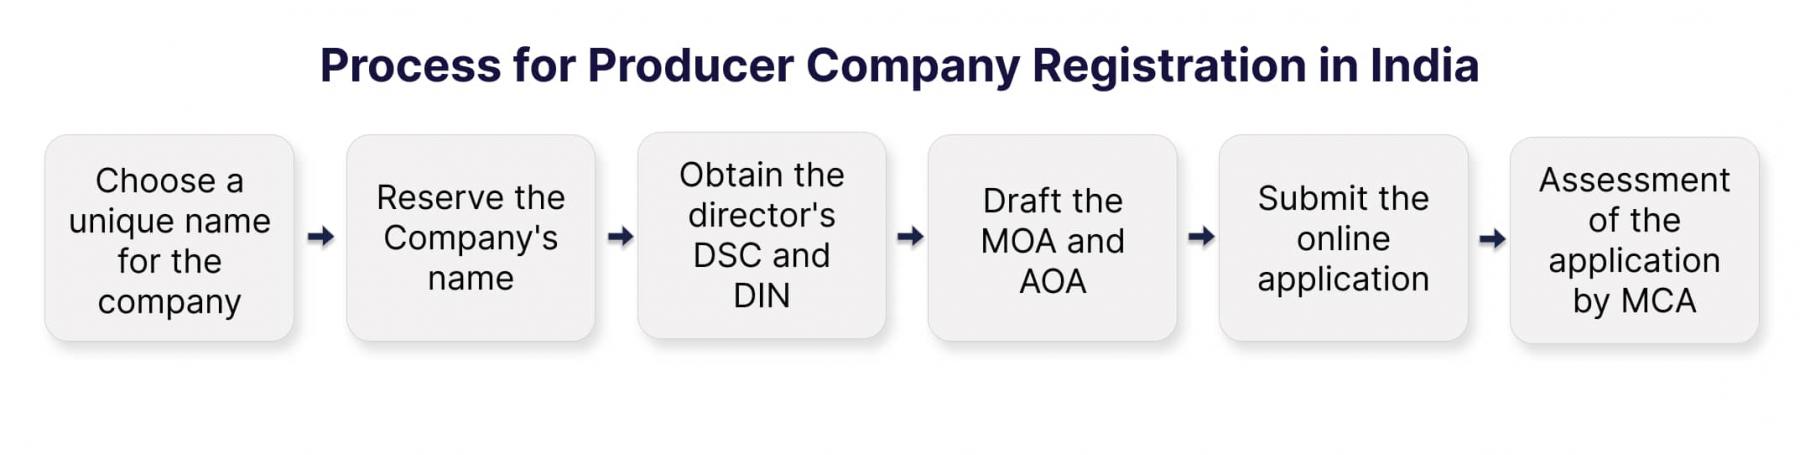 Process for Producer Company Registration in India